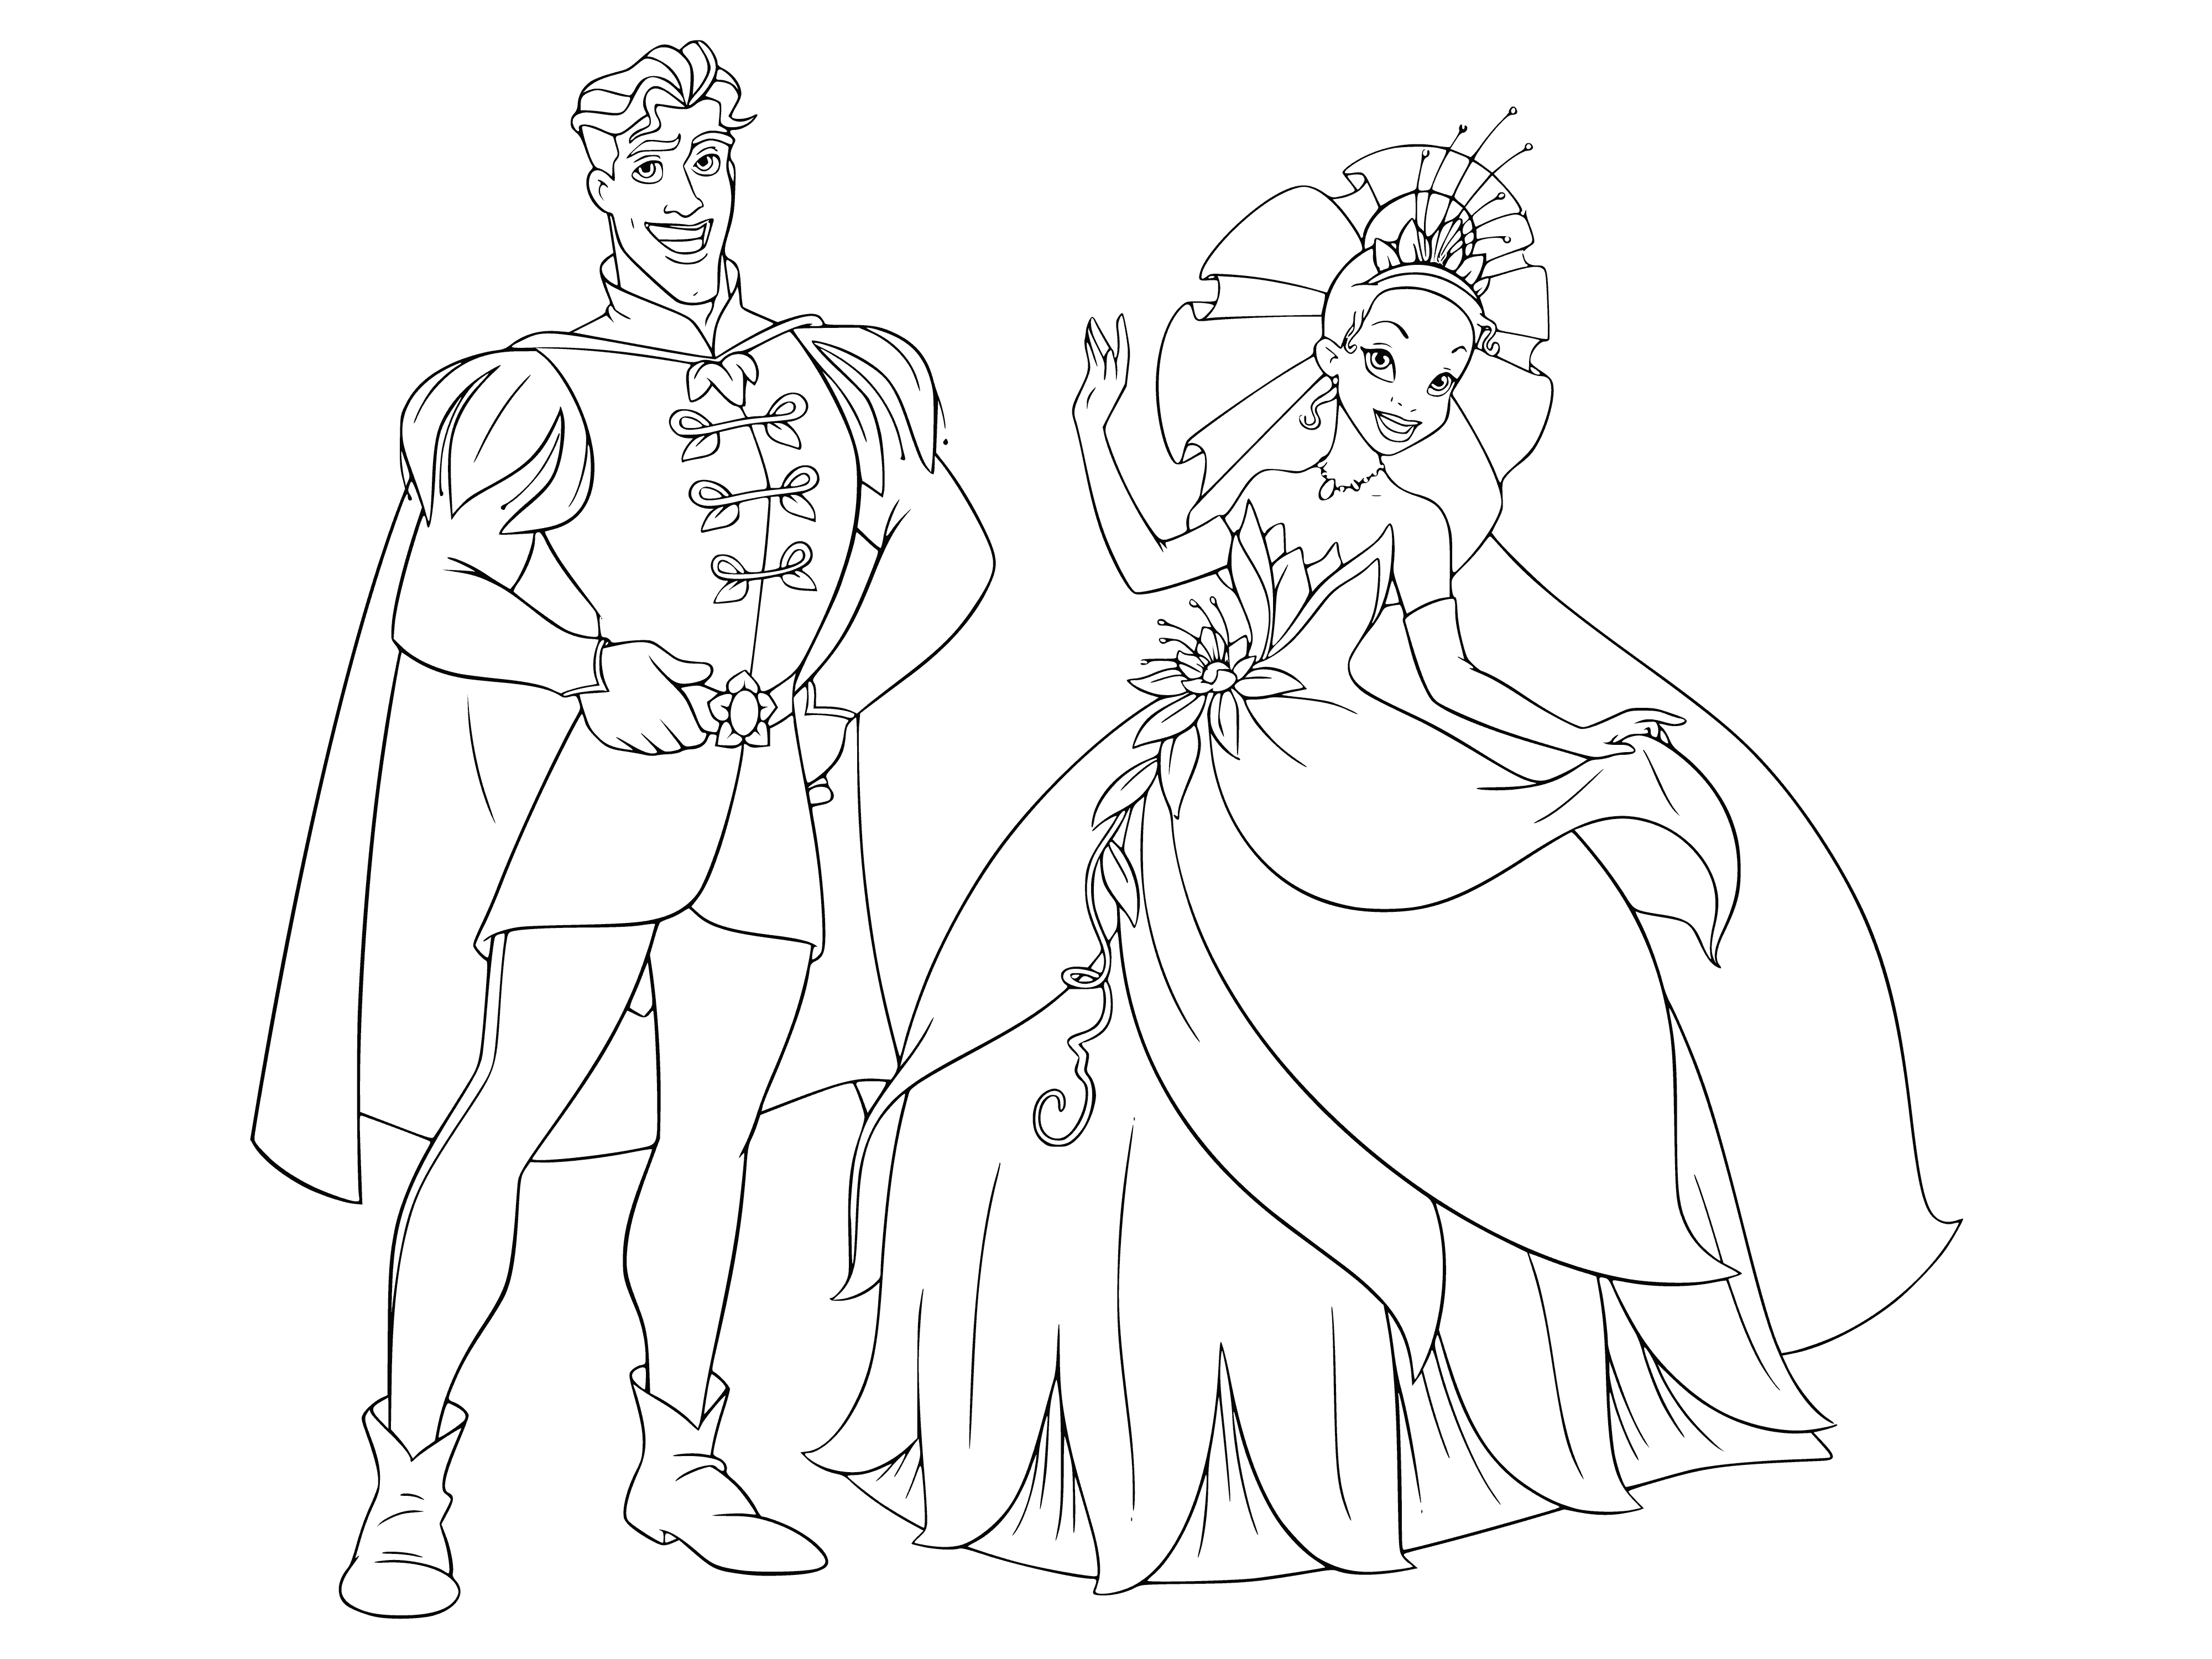 coloring page: Man in purple suit admires woman in green dress w/ purple tiara. They stand in front of large balcony-adorned building.